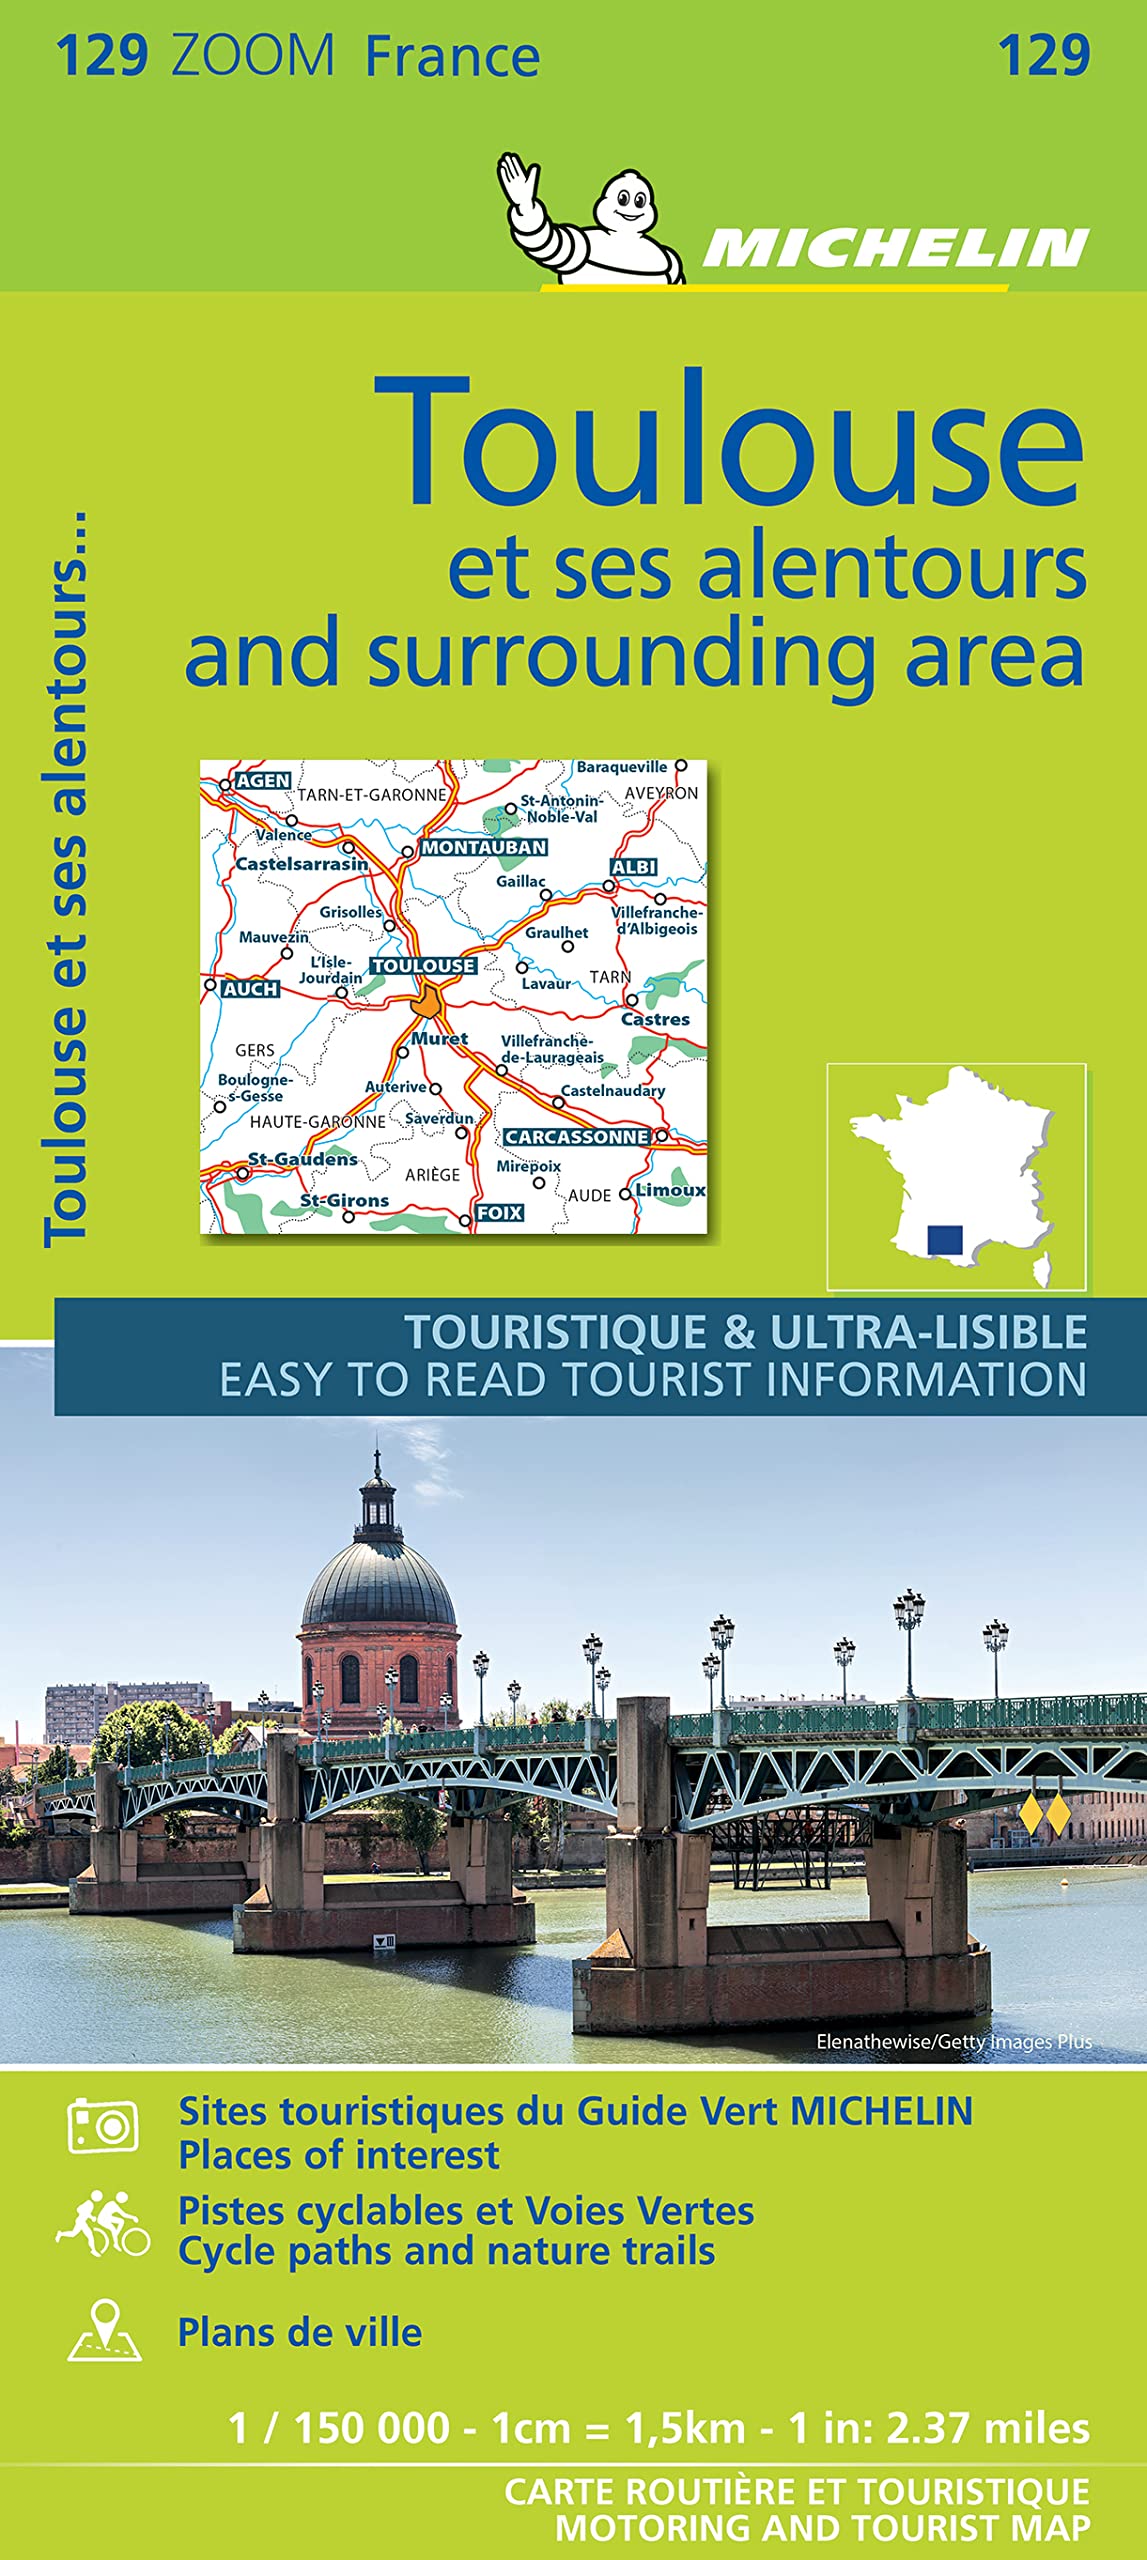 129- Toulouse - Zoom France Michelin Map